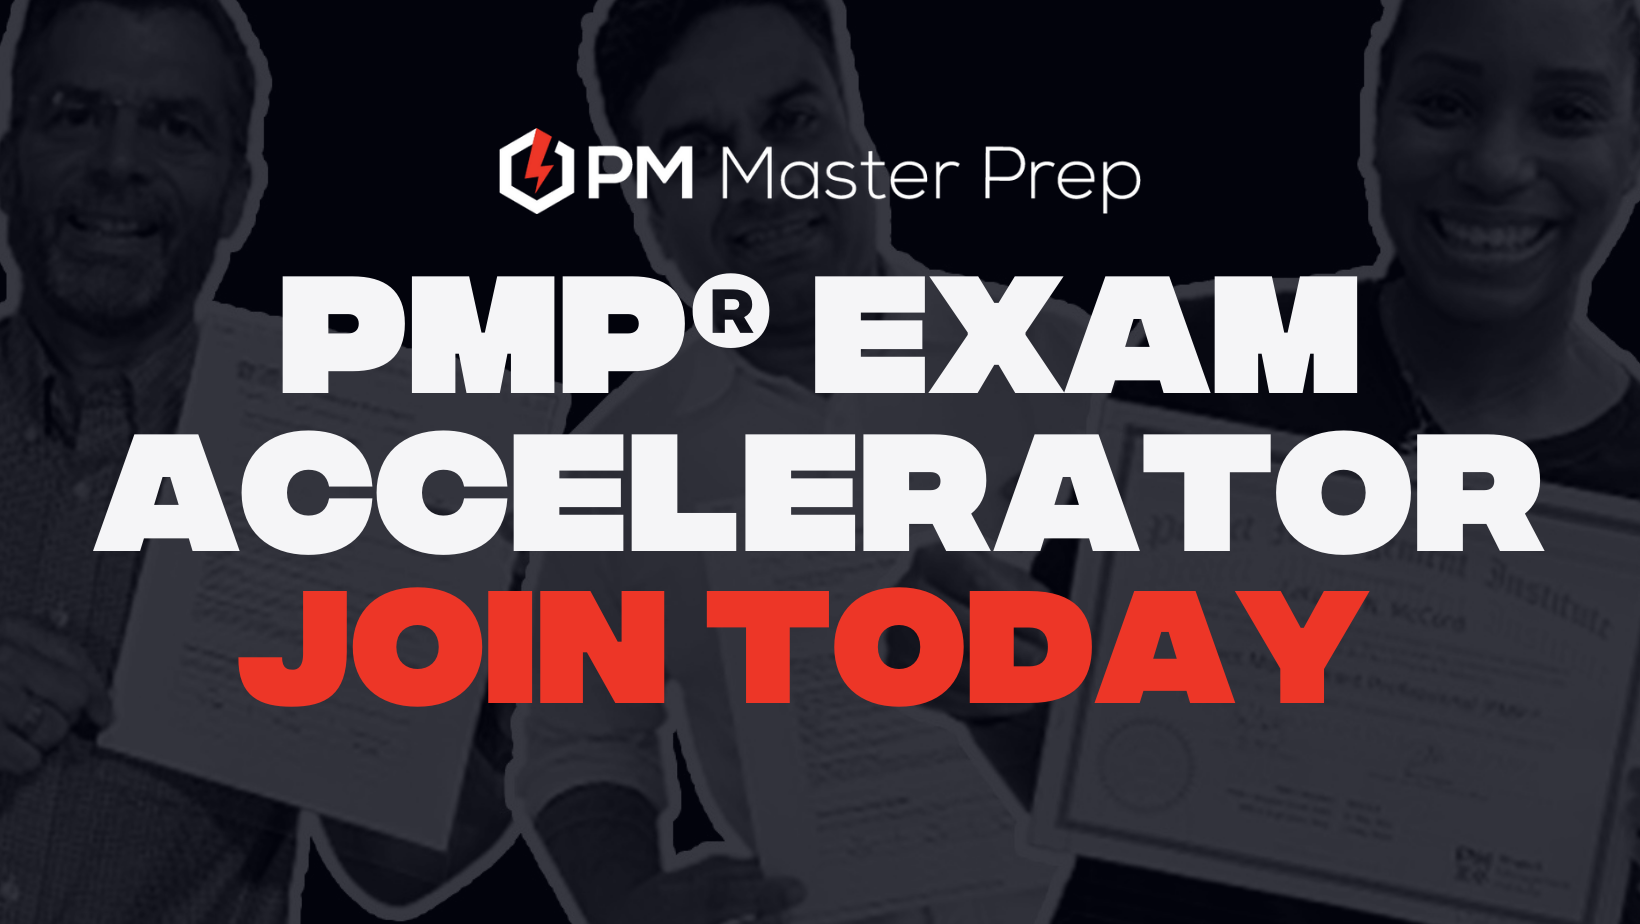 PMP Exam Accelerator by PM Master Prep